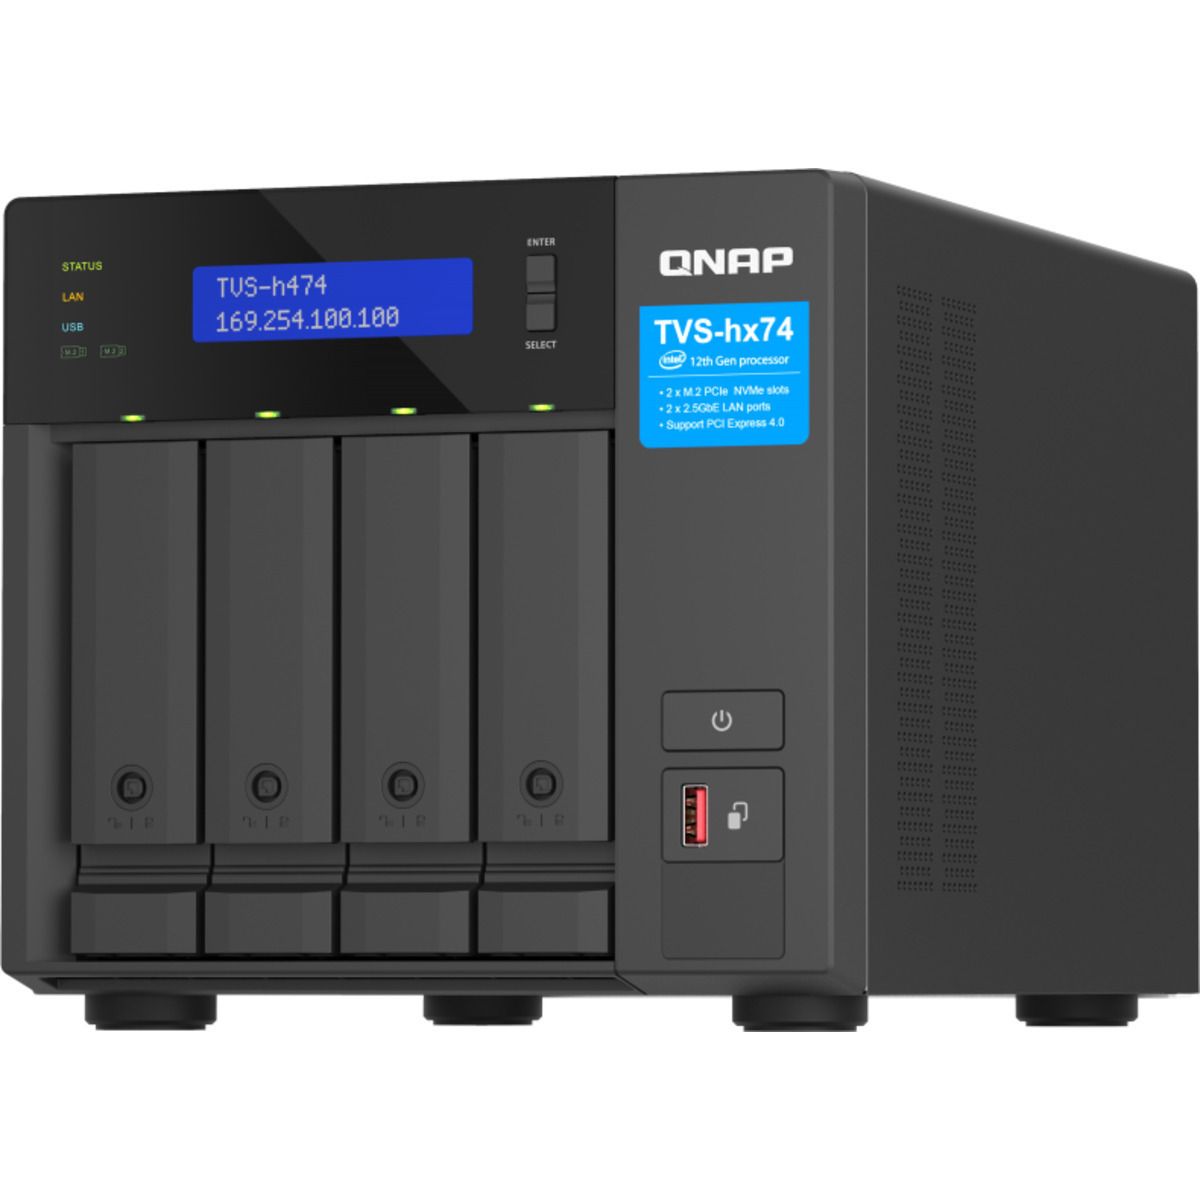 QNAP TVS-h474 Pentium Gold 36tb 4-Bay Desktop Multimedia / Power User / Business NAS - Network Attached Storage Device 2x18tb Western Digital Red Pro WD181KFGX 3.5 7200rpm SATA 6Gb/s HDD NAS Class Drives Installed - Burn-In Tested - FREE RAM UPGRADE TVS-h474 Pentium Gold